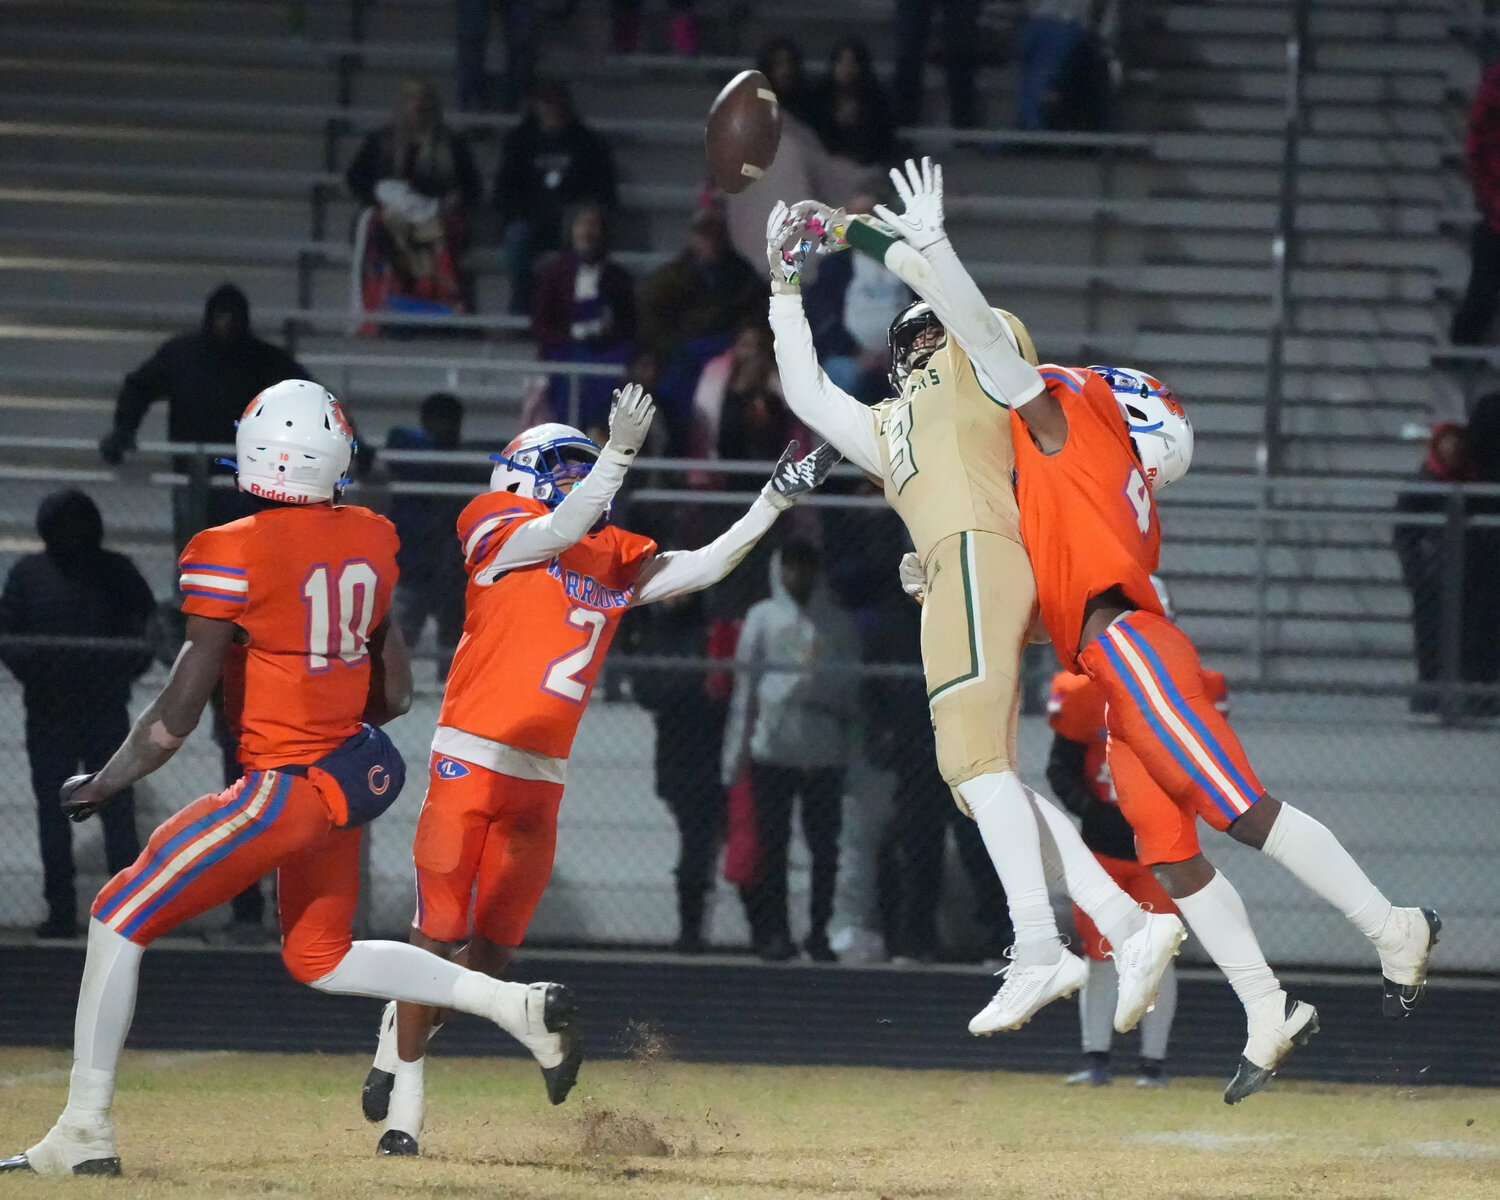 A pass is just out of reach for Northwood’s Cam Fowler (8) during the Chargers' playoff opening loss to Louisburg.